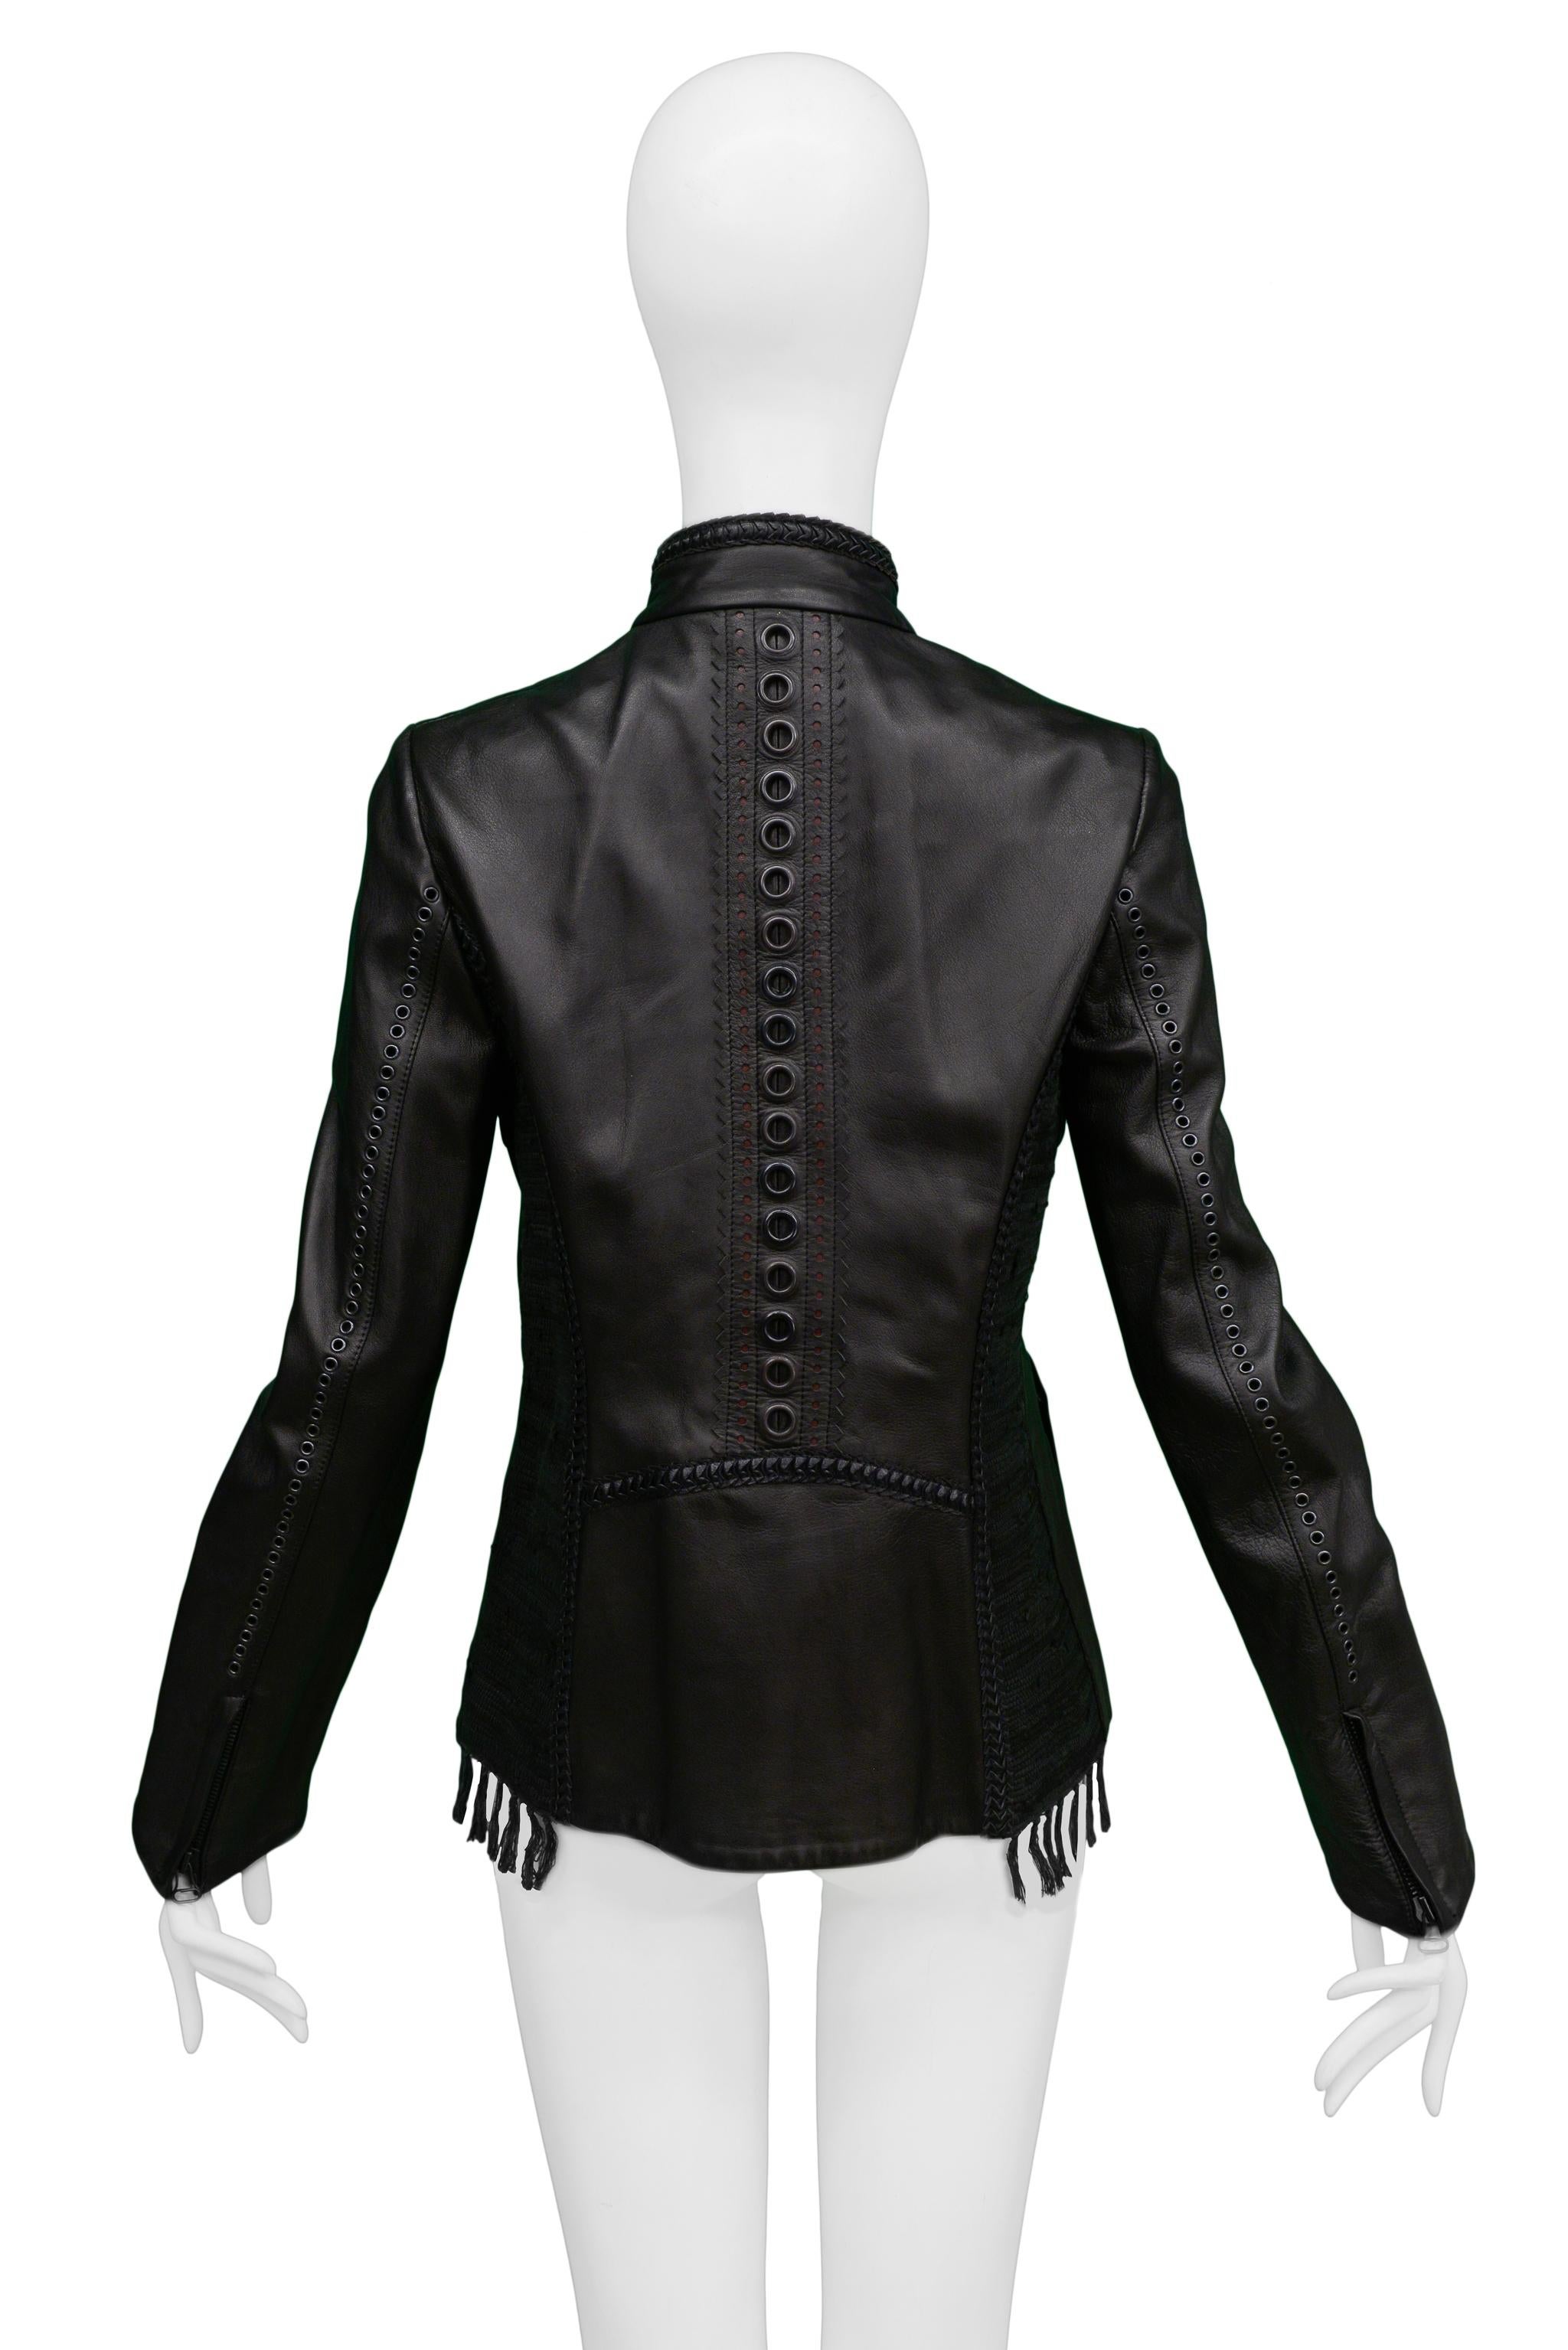 Stunning Gianfranco Ferre Black Motorcycle Leather Jacket With Fur Trim For Sale 1